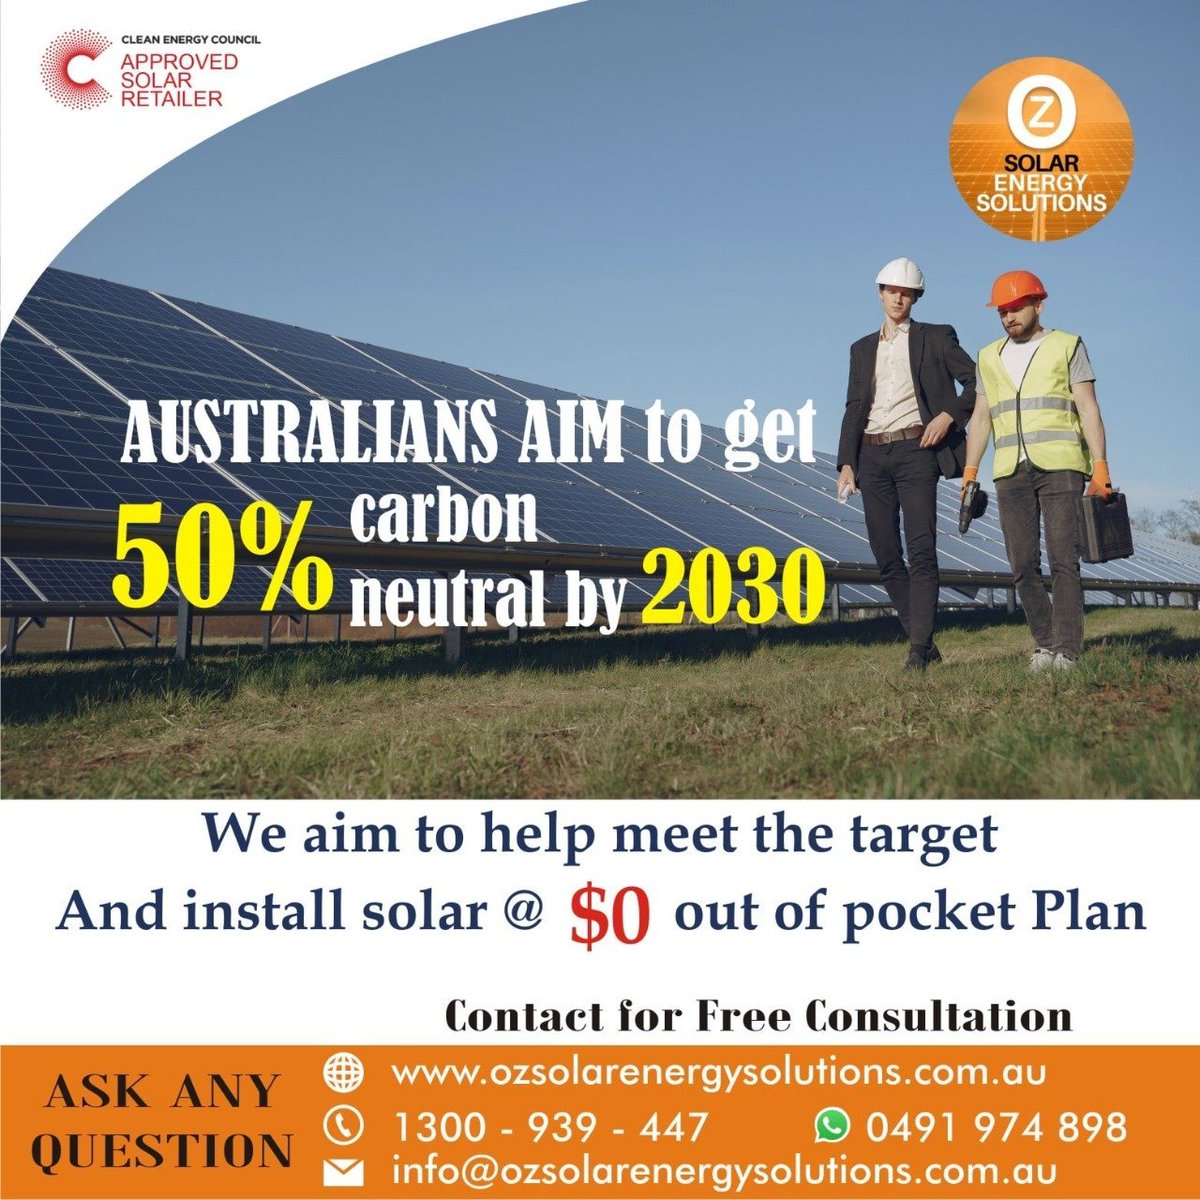 OZ solar offering tips to reduce energy bill maximum with solar
Free One-to-One Consulting session 📷
Ask Any Question 📷
.
.
#installation #solar #panel #solarenergy #solarsystem #solarpanel #solarinstallation #solarpanels #solarpanelinstallation #solarpanelsinstallation